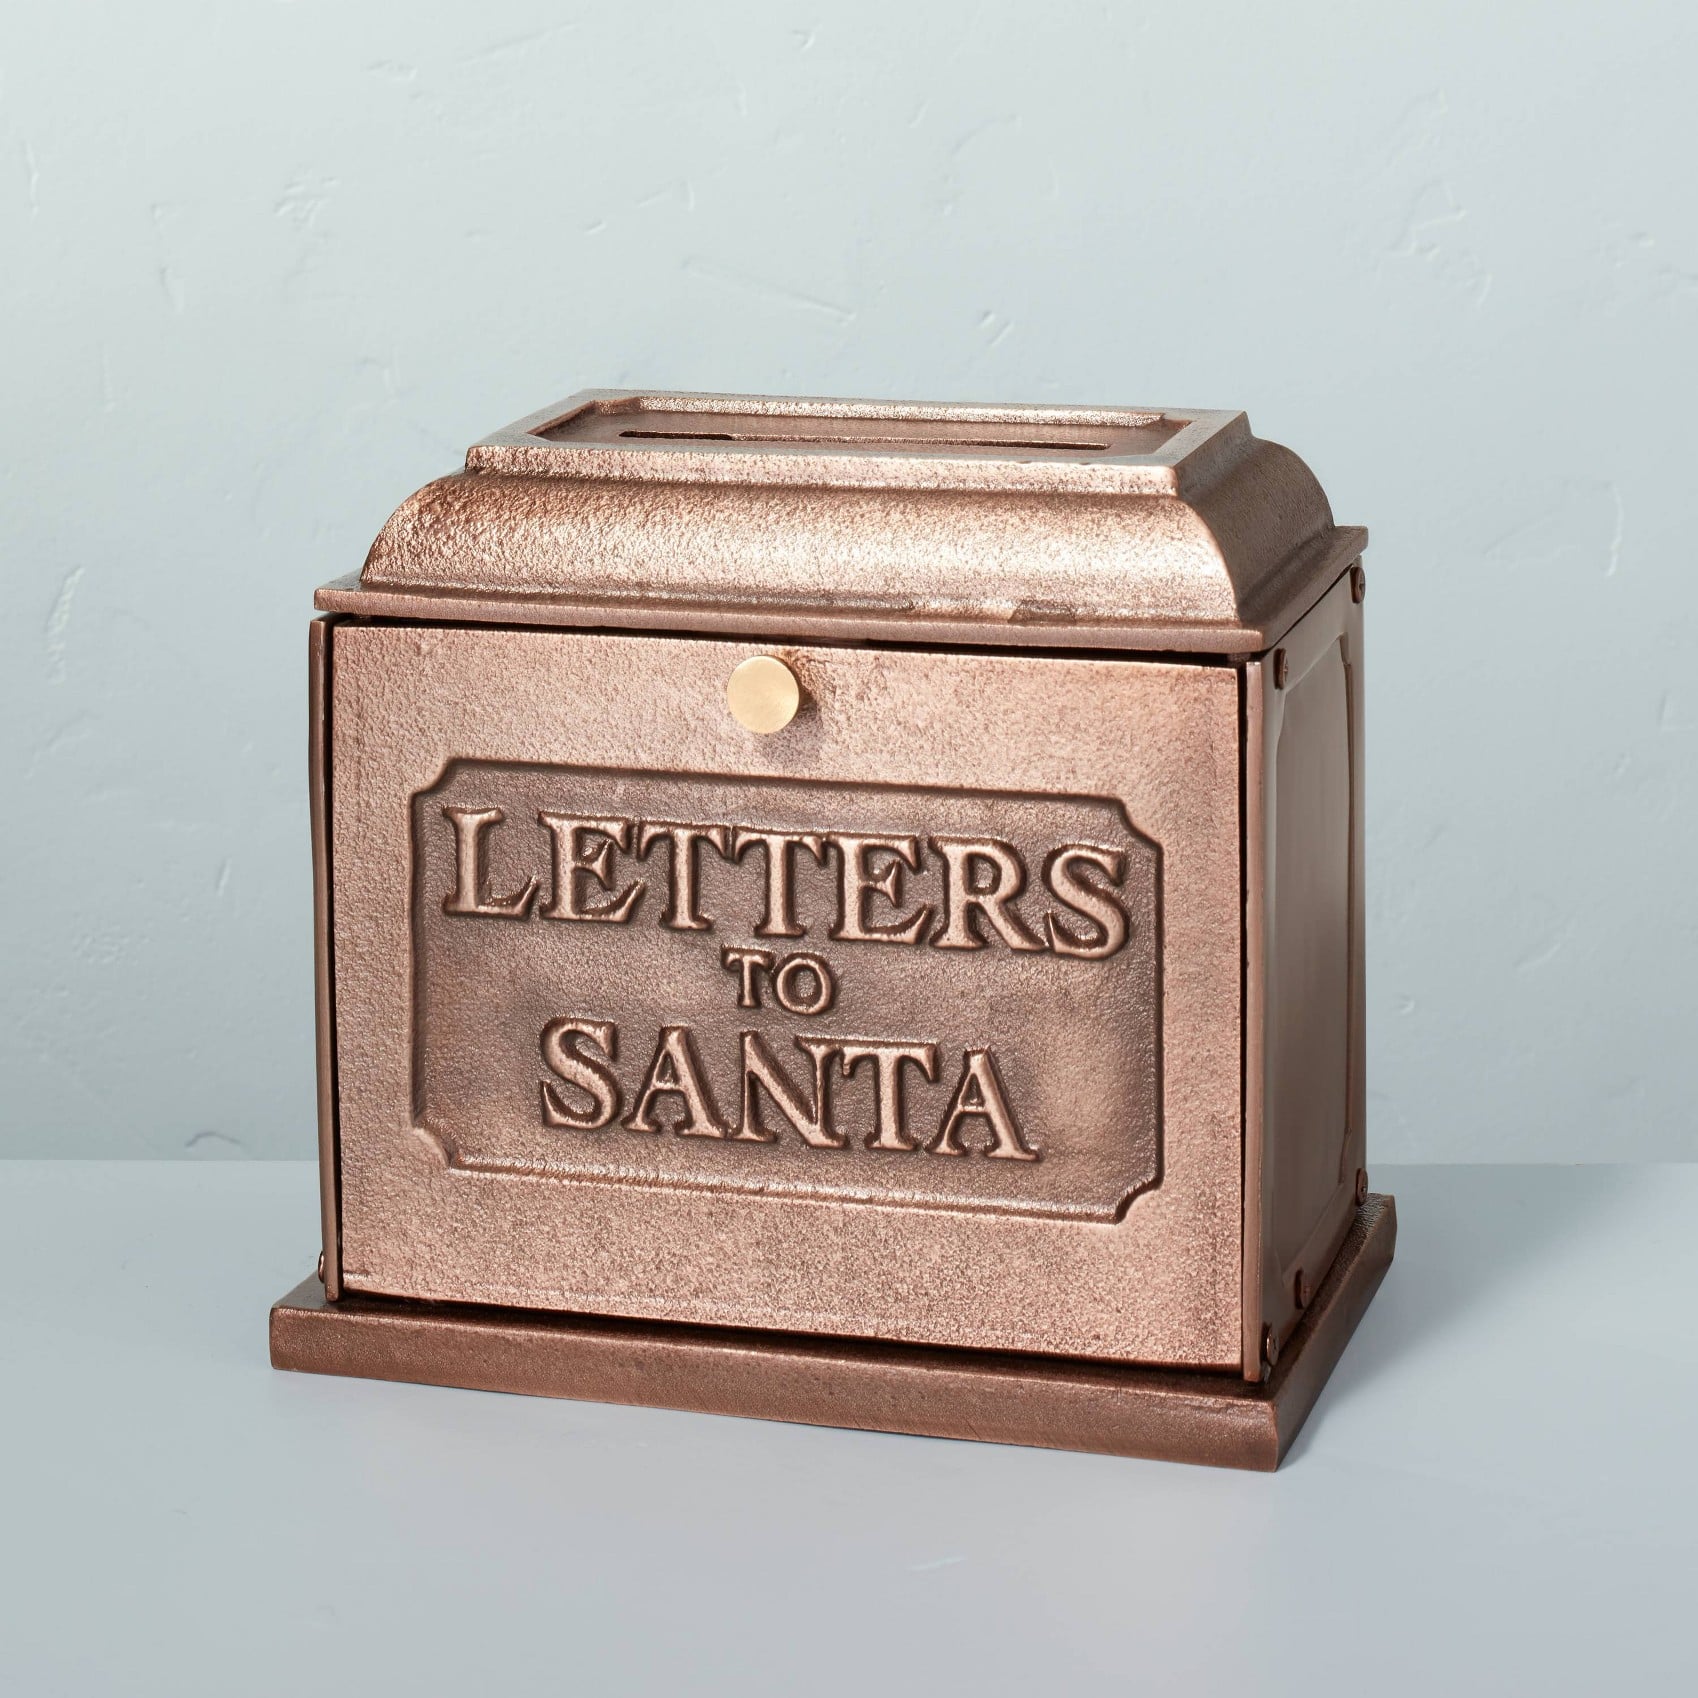 NEW Letters to Santa Green Mail Box Hearth and Hand By Magnolia SOLD OUT 